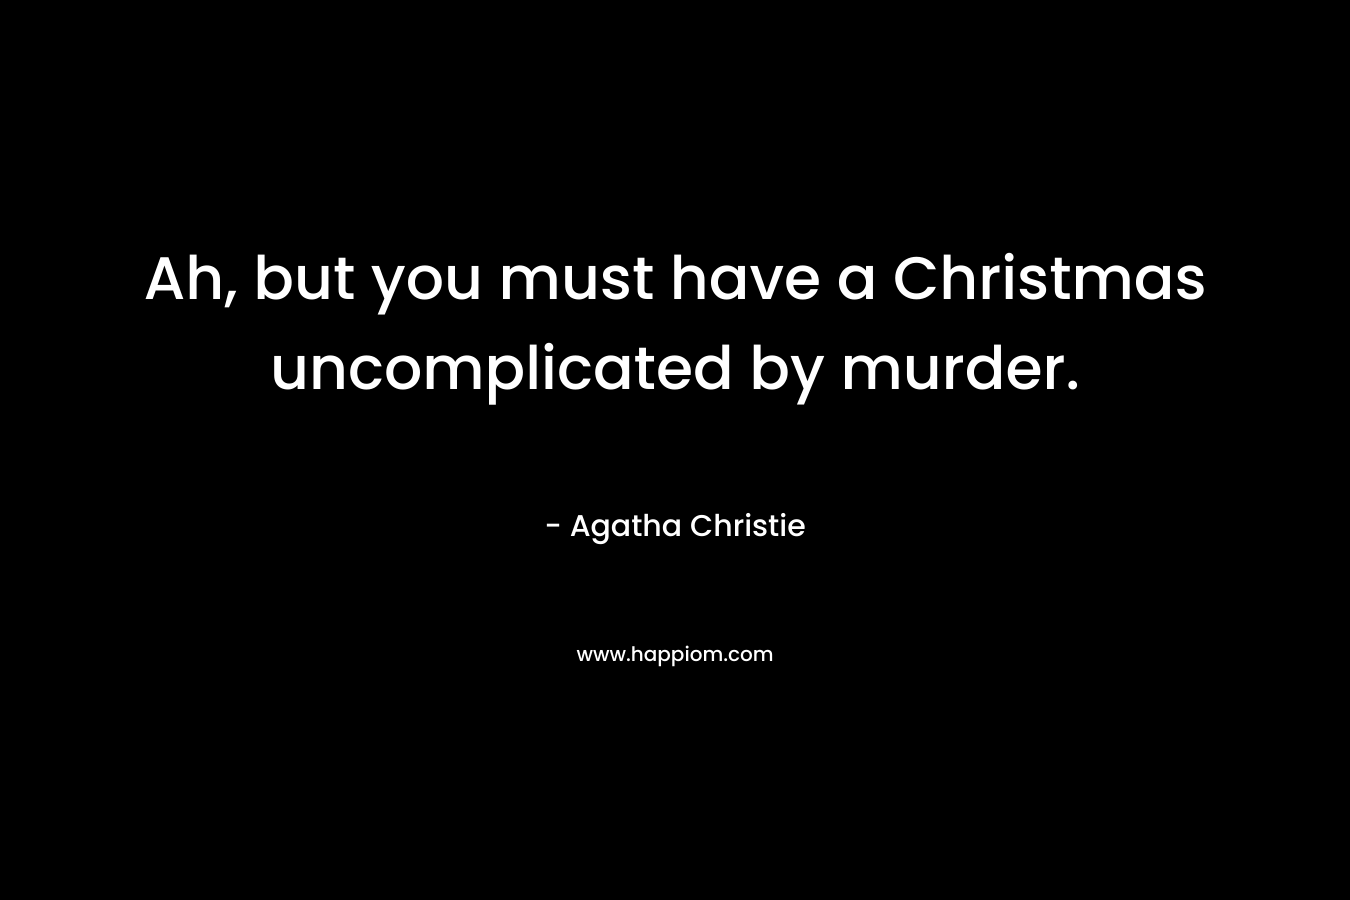 Ah, but you must have a Christmas uncomplicated by murder. – Agatha Christie